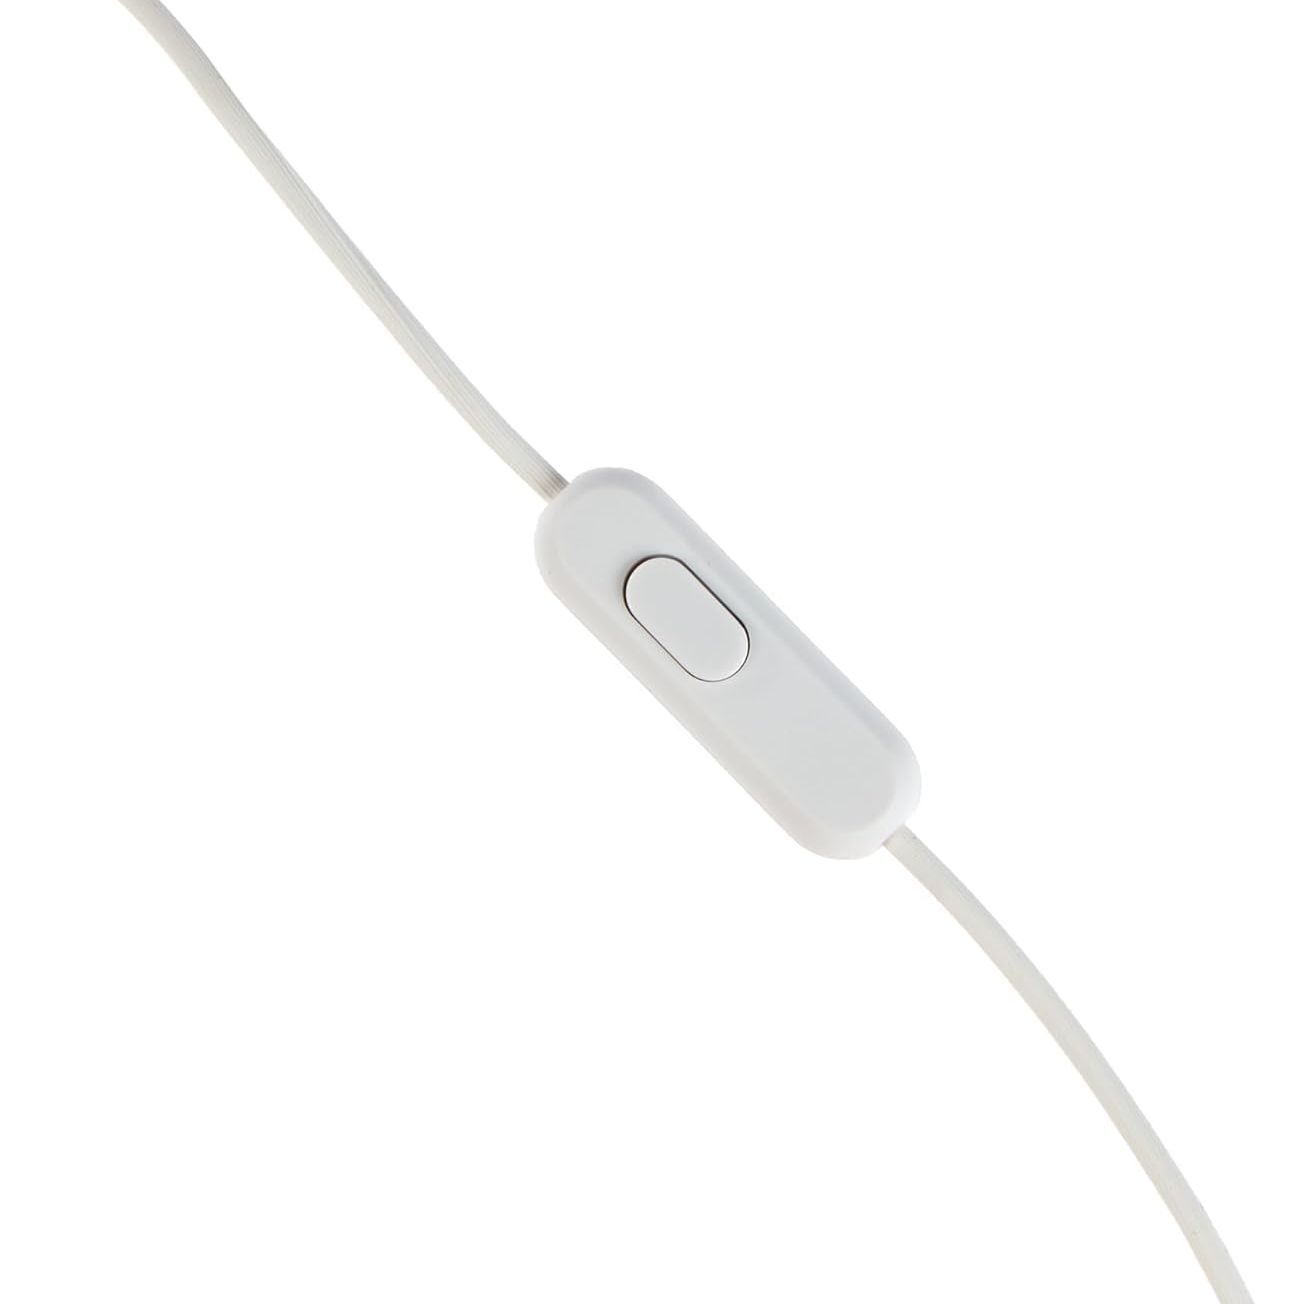 Sony MDREX15AP in-Ear Earbud Headphones with Mic, White - Clarissa Maxwell 